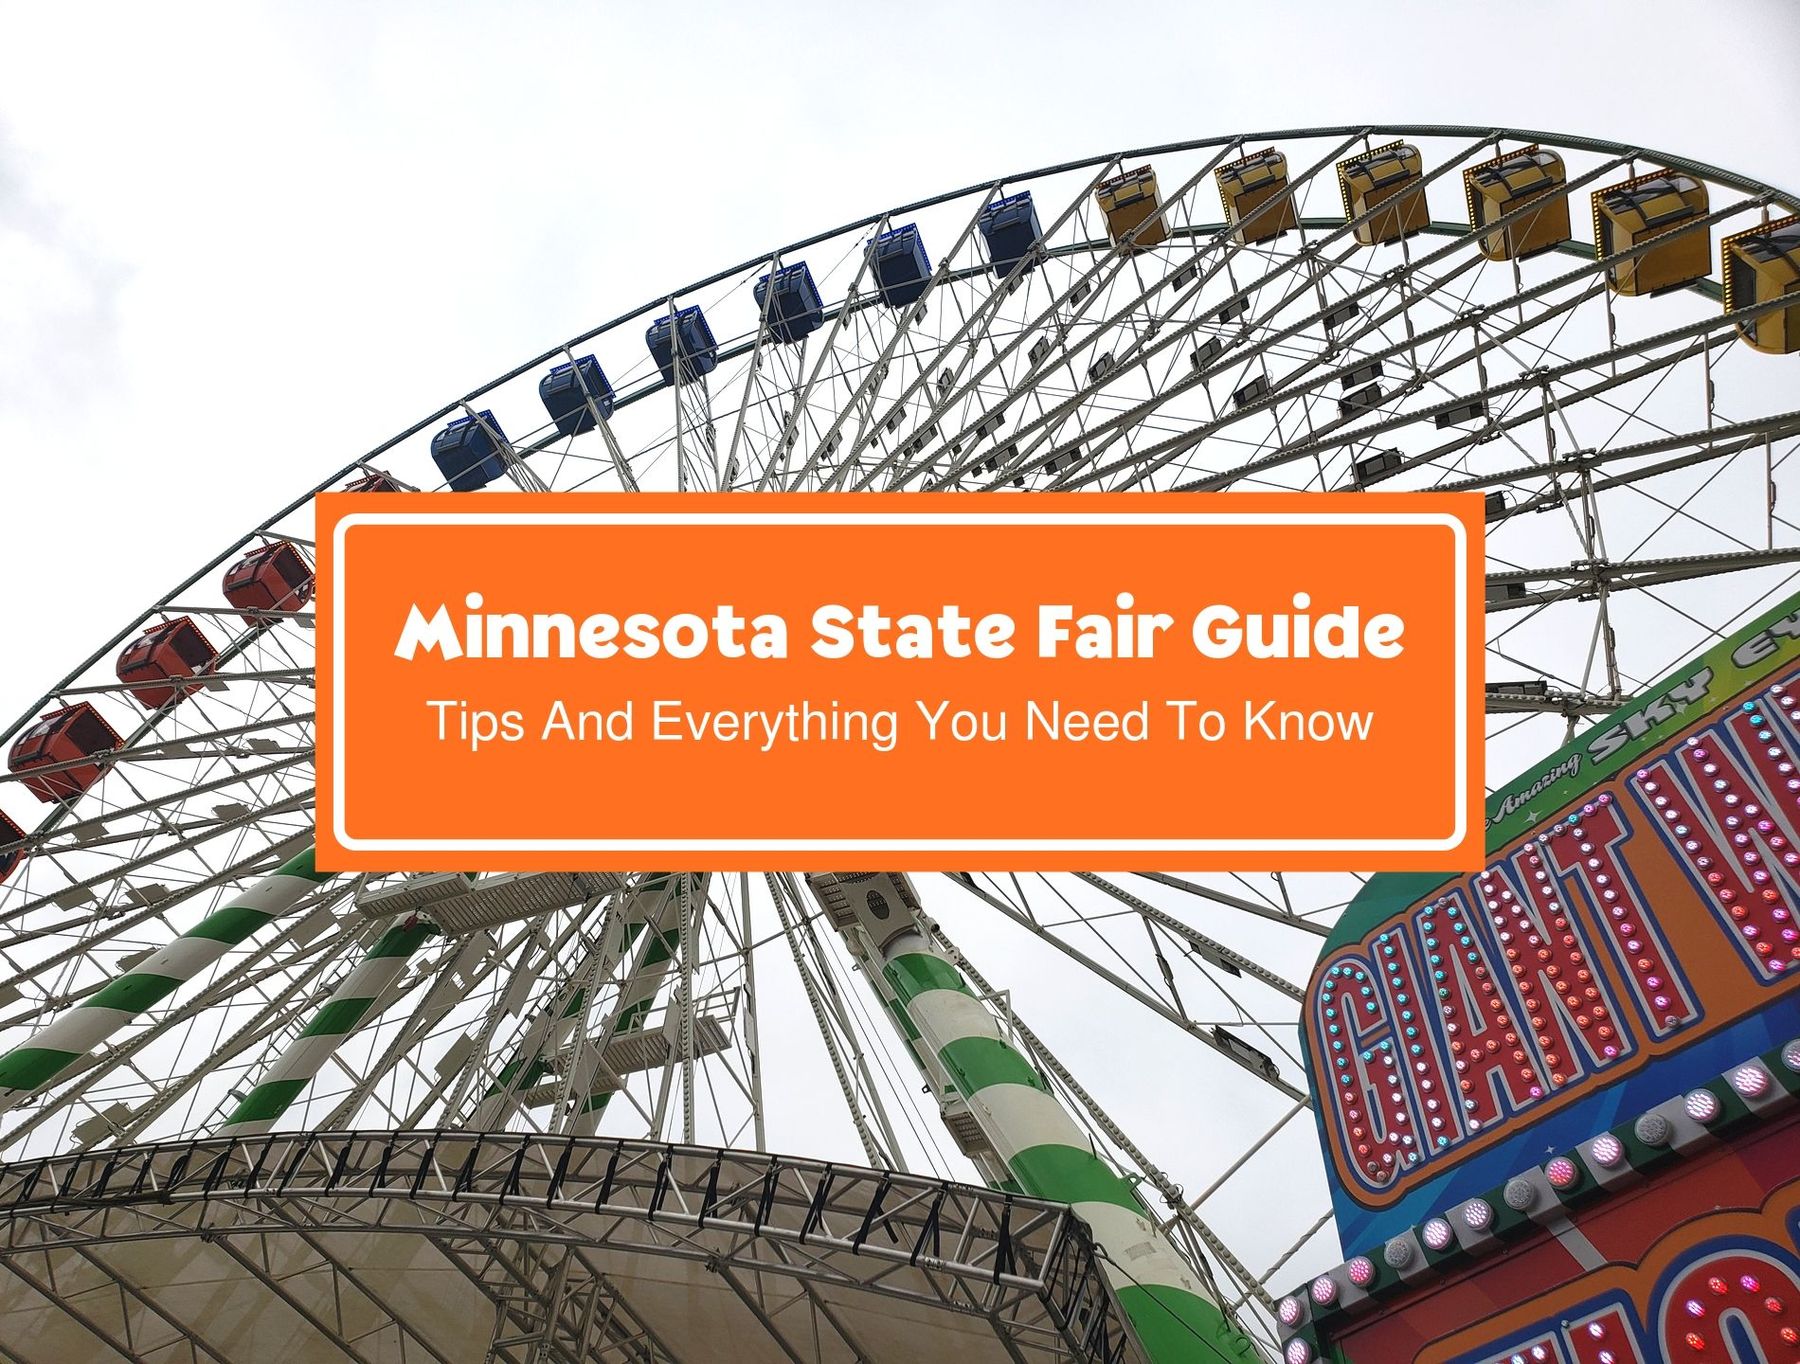 This Minnesota State Fair guide includes tips and information on food, rides, dates, tickets, hours, and accessibility.